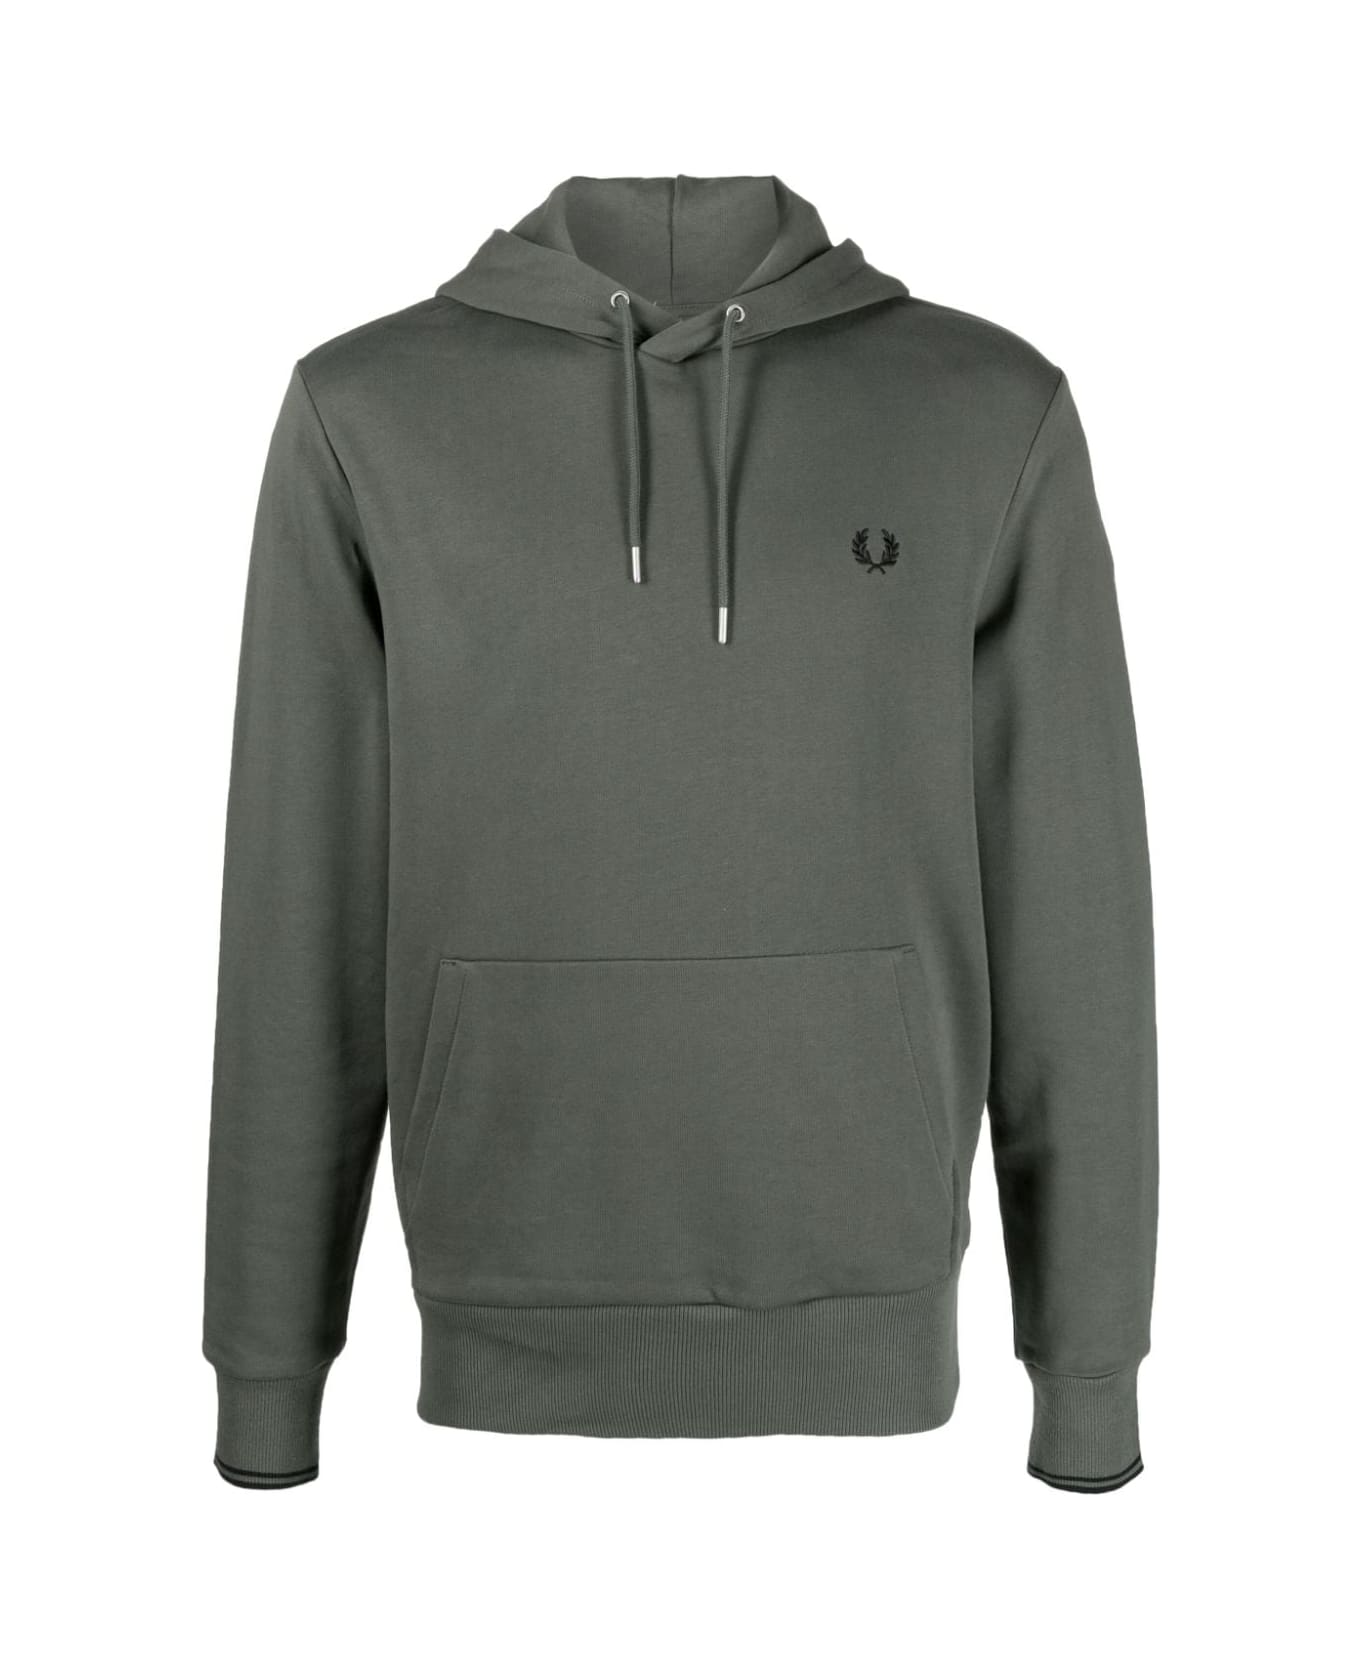 Fred Perry Fp Tipped Hooded Sweatshirt - Field Green